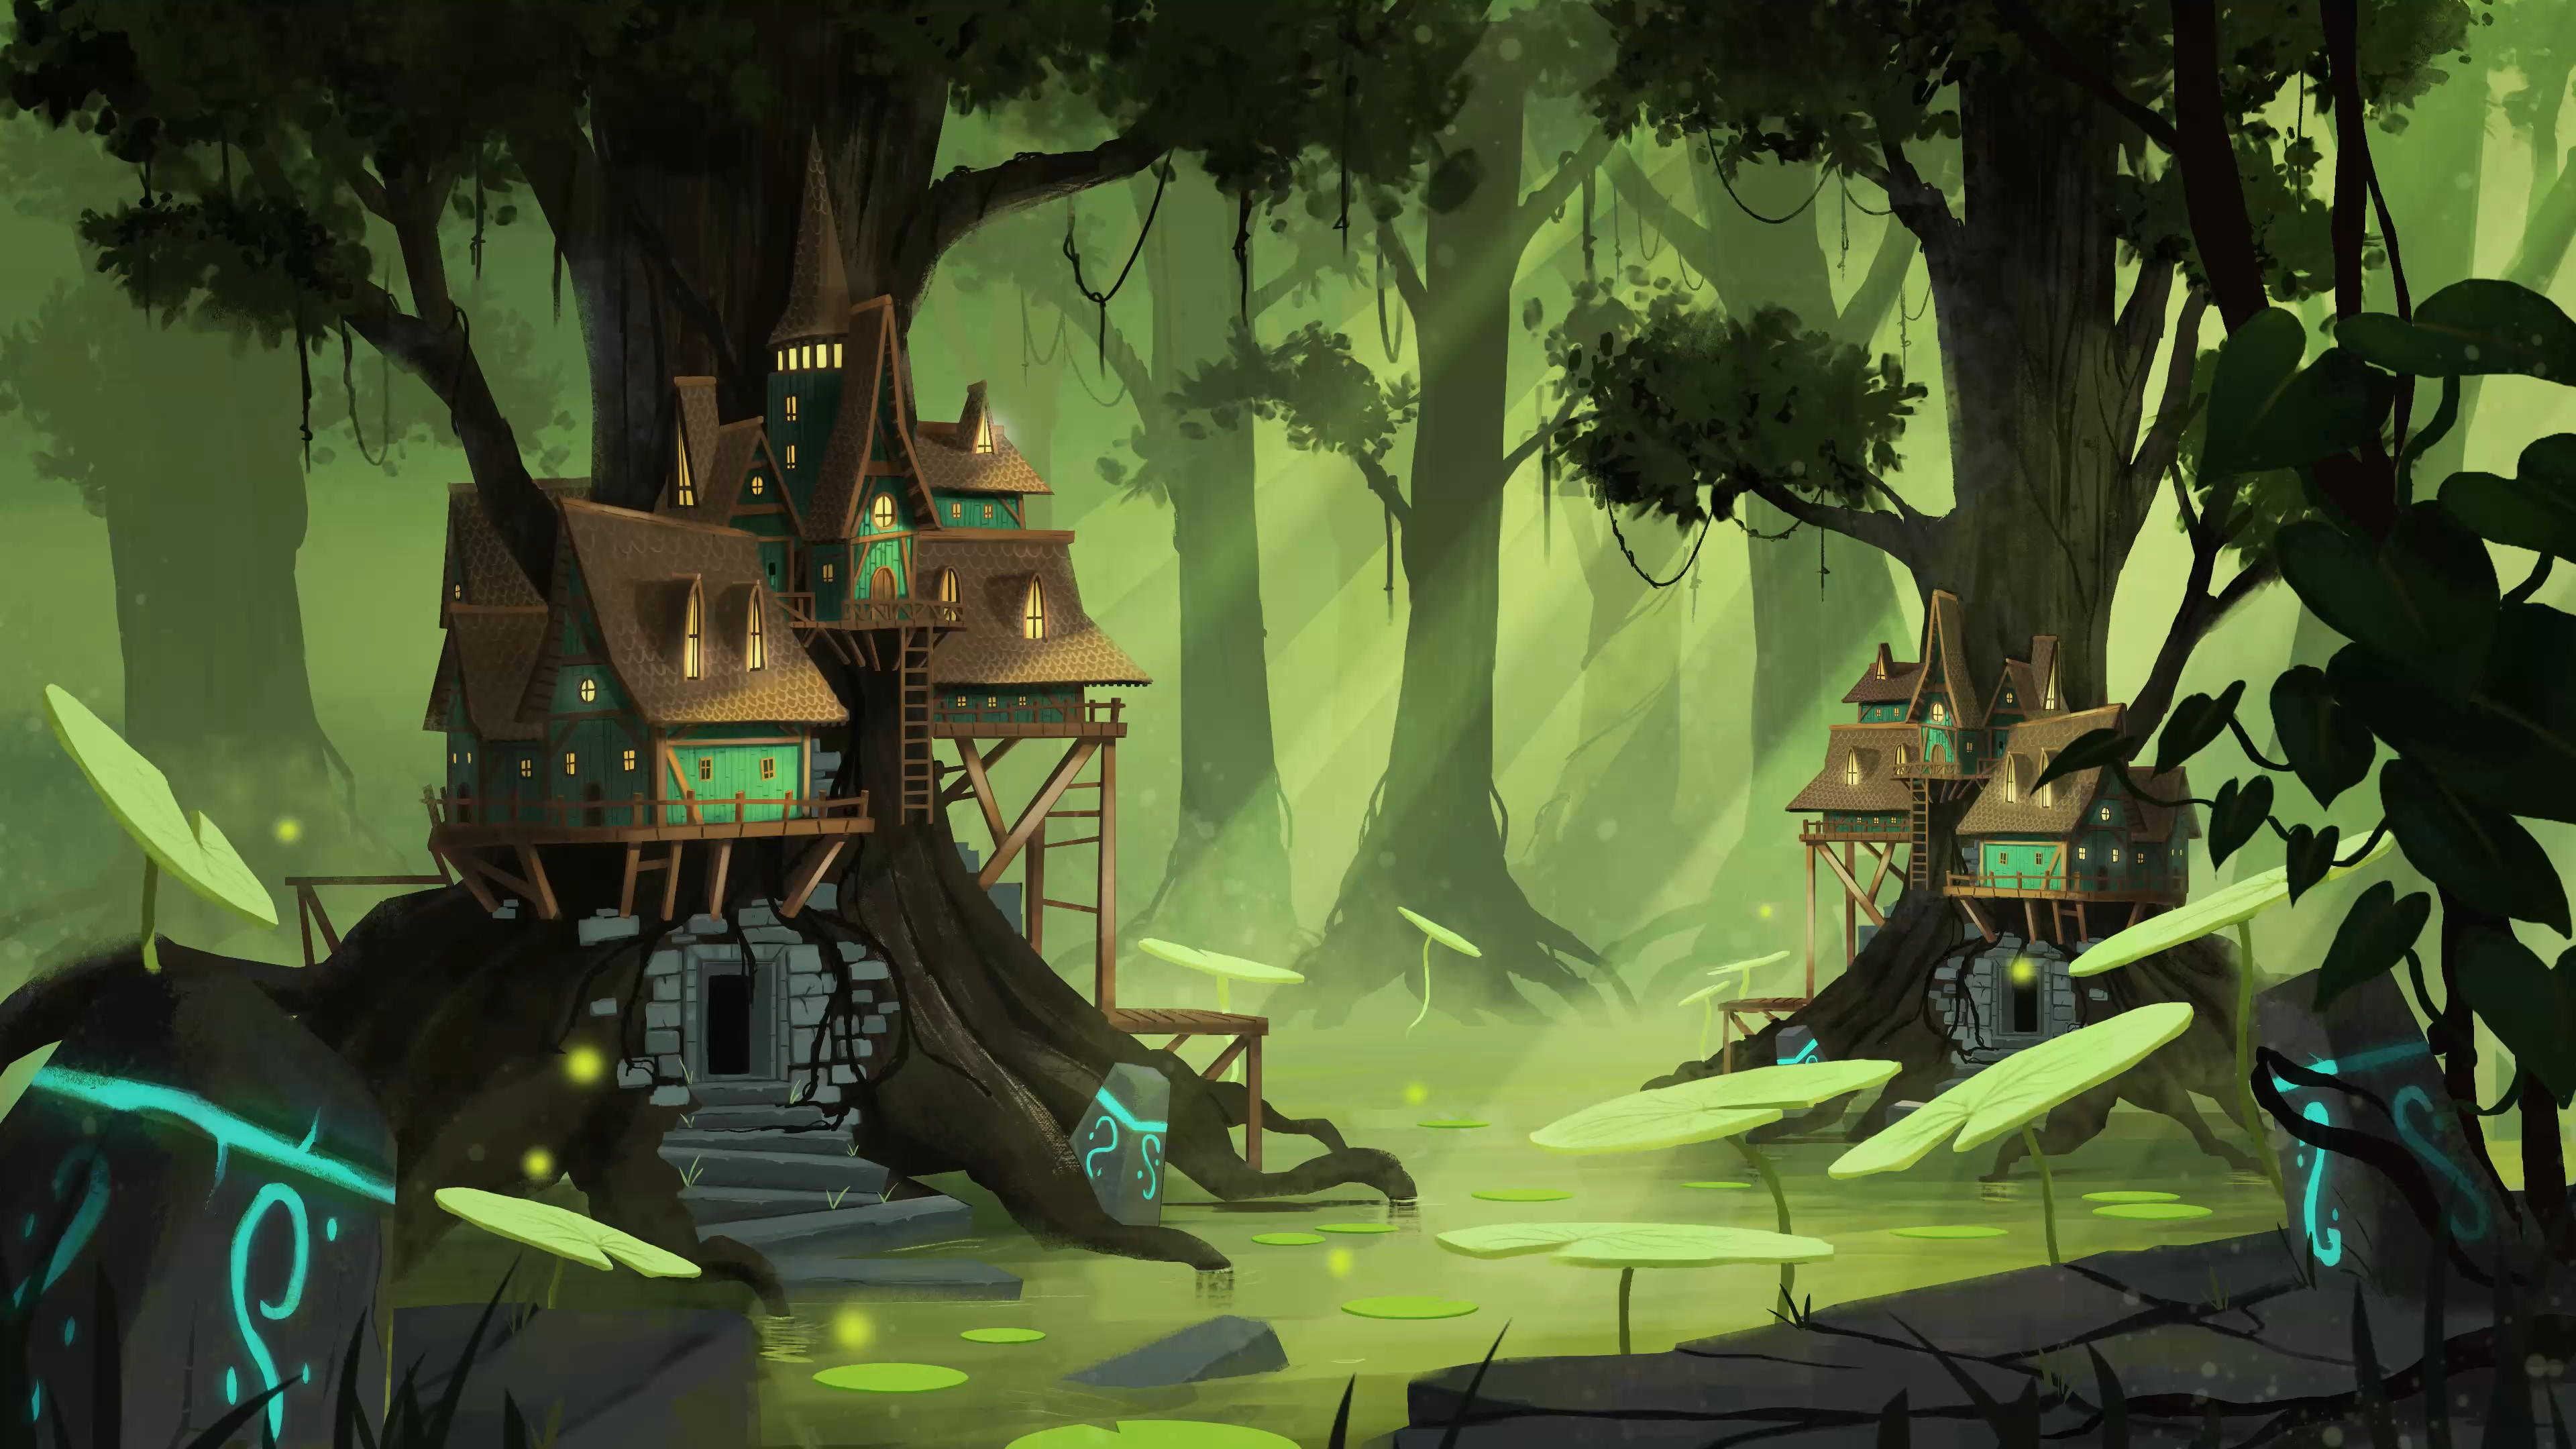 Hugo Barret Castan Lily Pads Trees Water House Roots Lights Forest 3840x2160